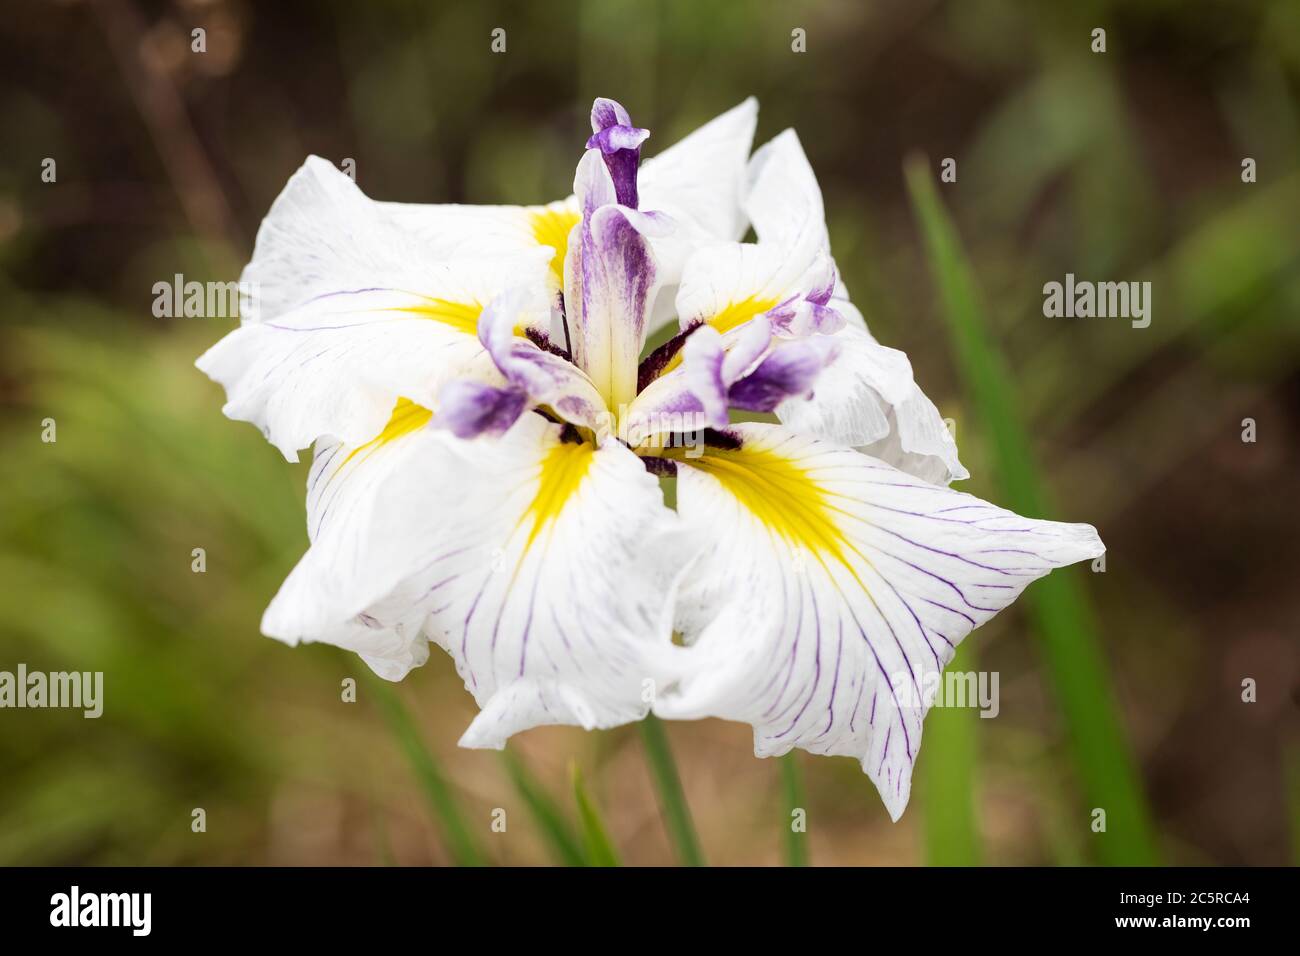 Caprician Butterfly Japanese iris (Iris ensata) with a beautiful white, purple, and yellow bloom. Stock Photo